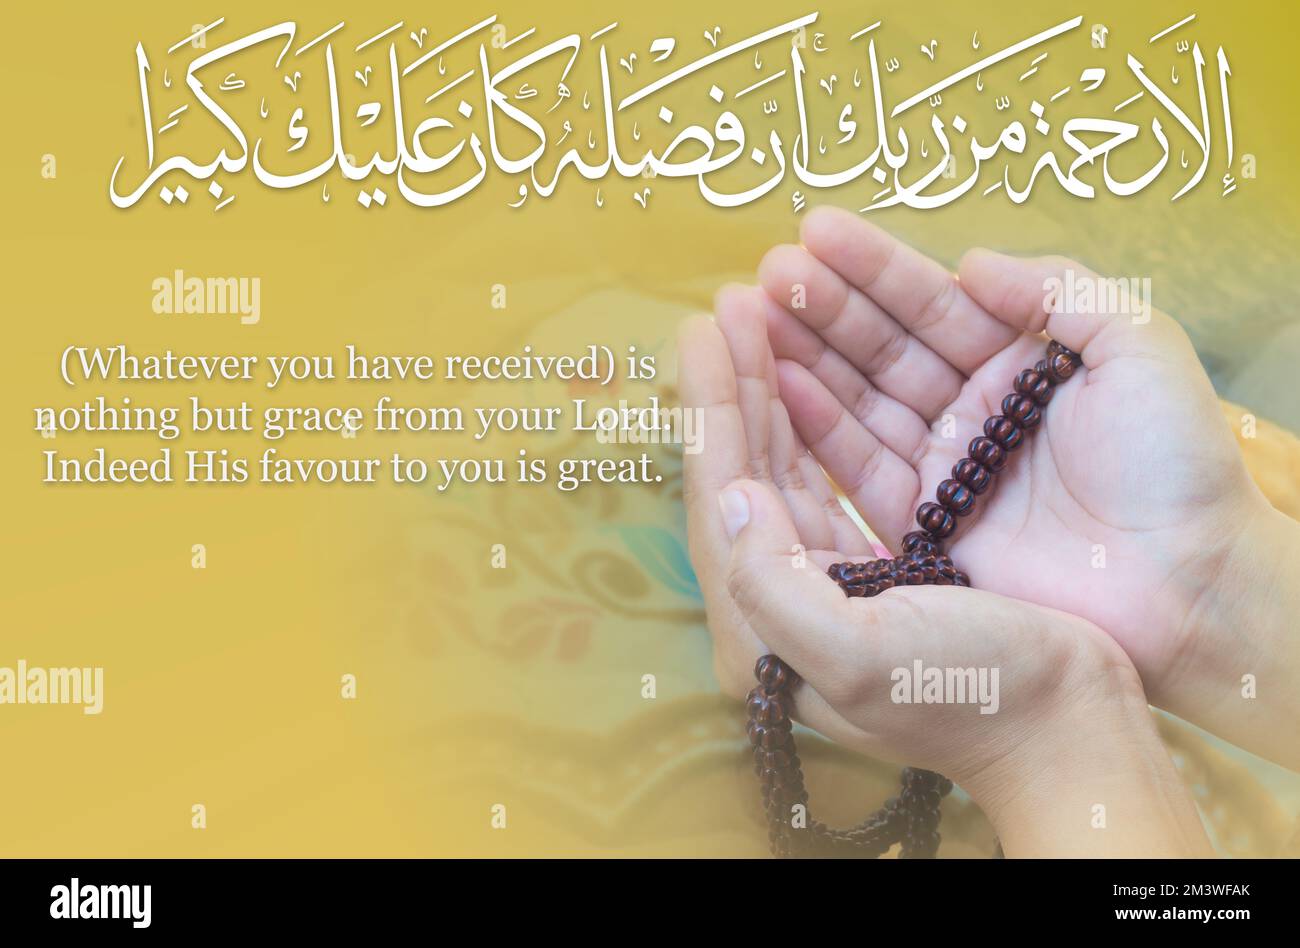 Young Muslim woman praying, Image of dua in Arabic with English translation AL-ISRA AYAT 87 , Open palm hand of Indonesia Islamic female with praying Stock Photo